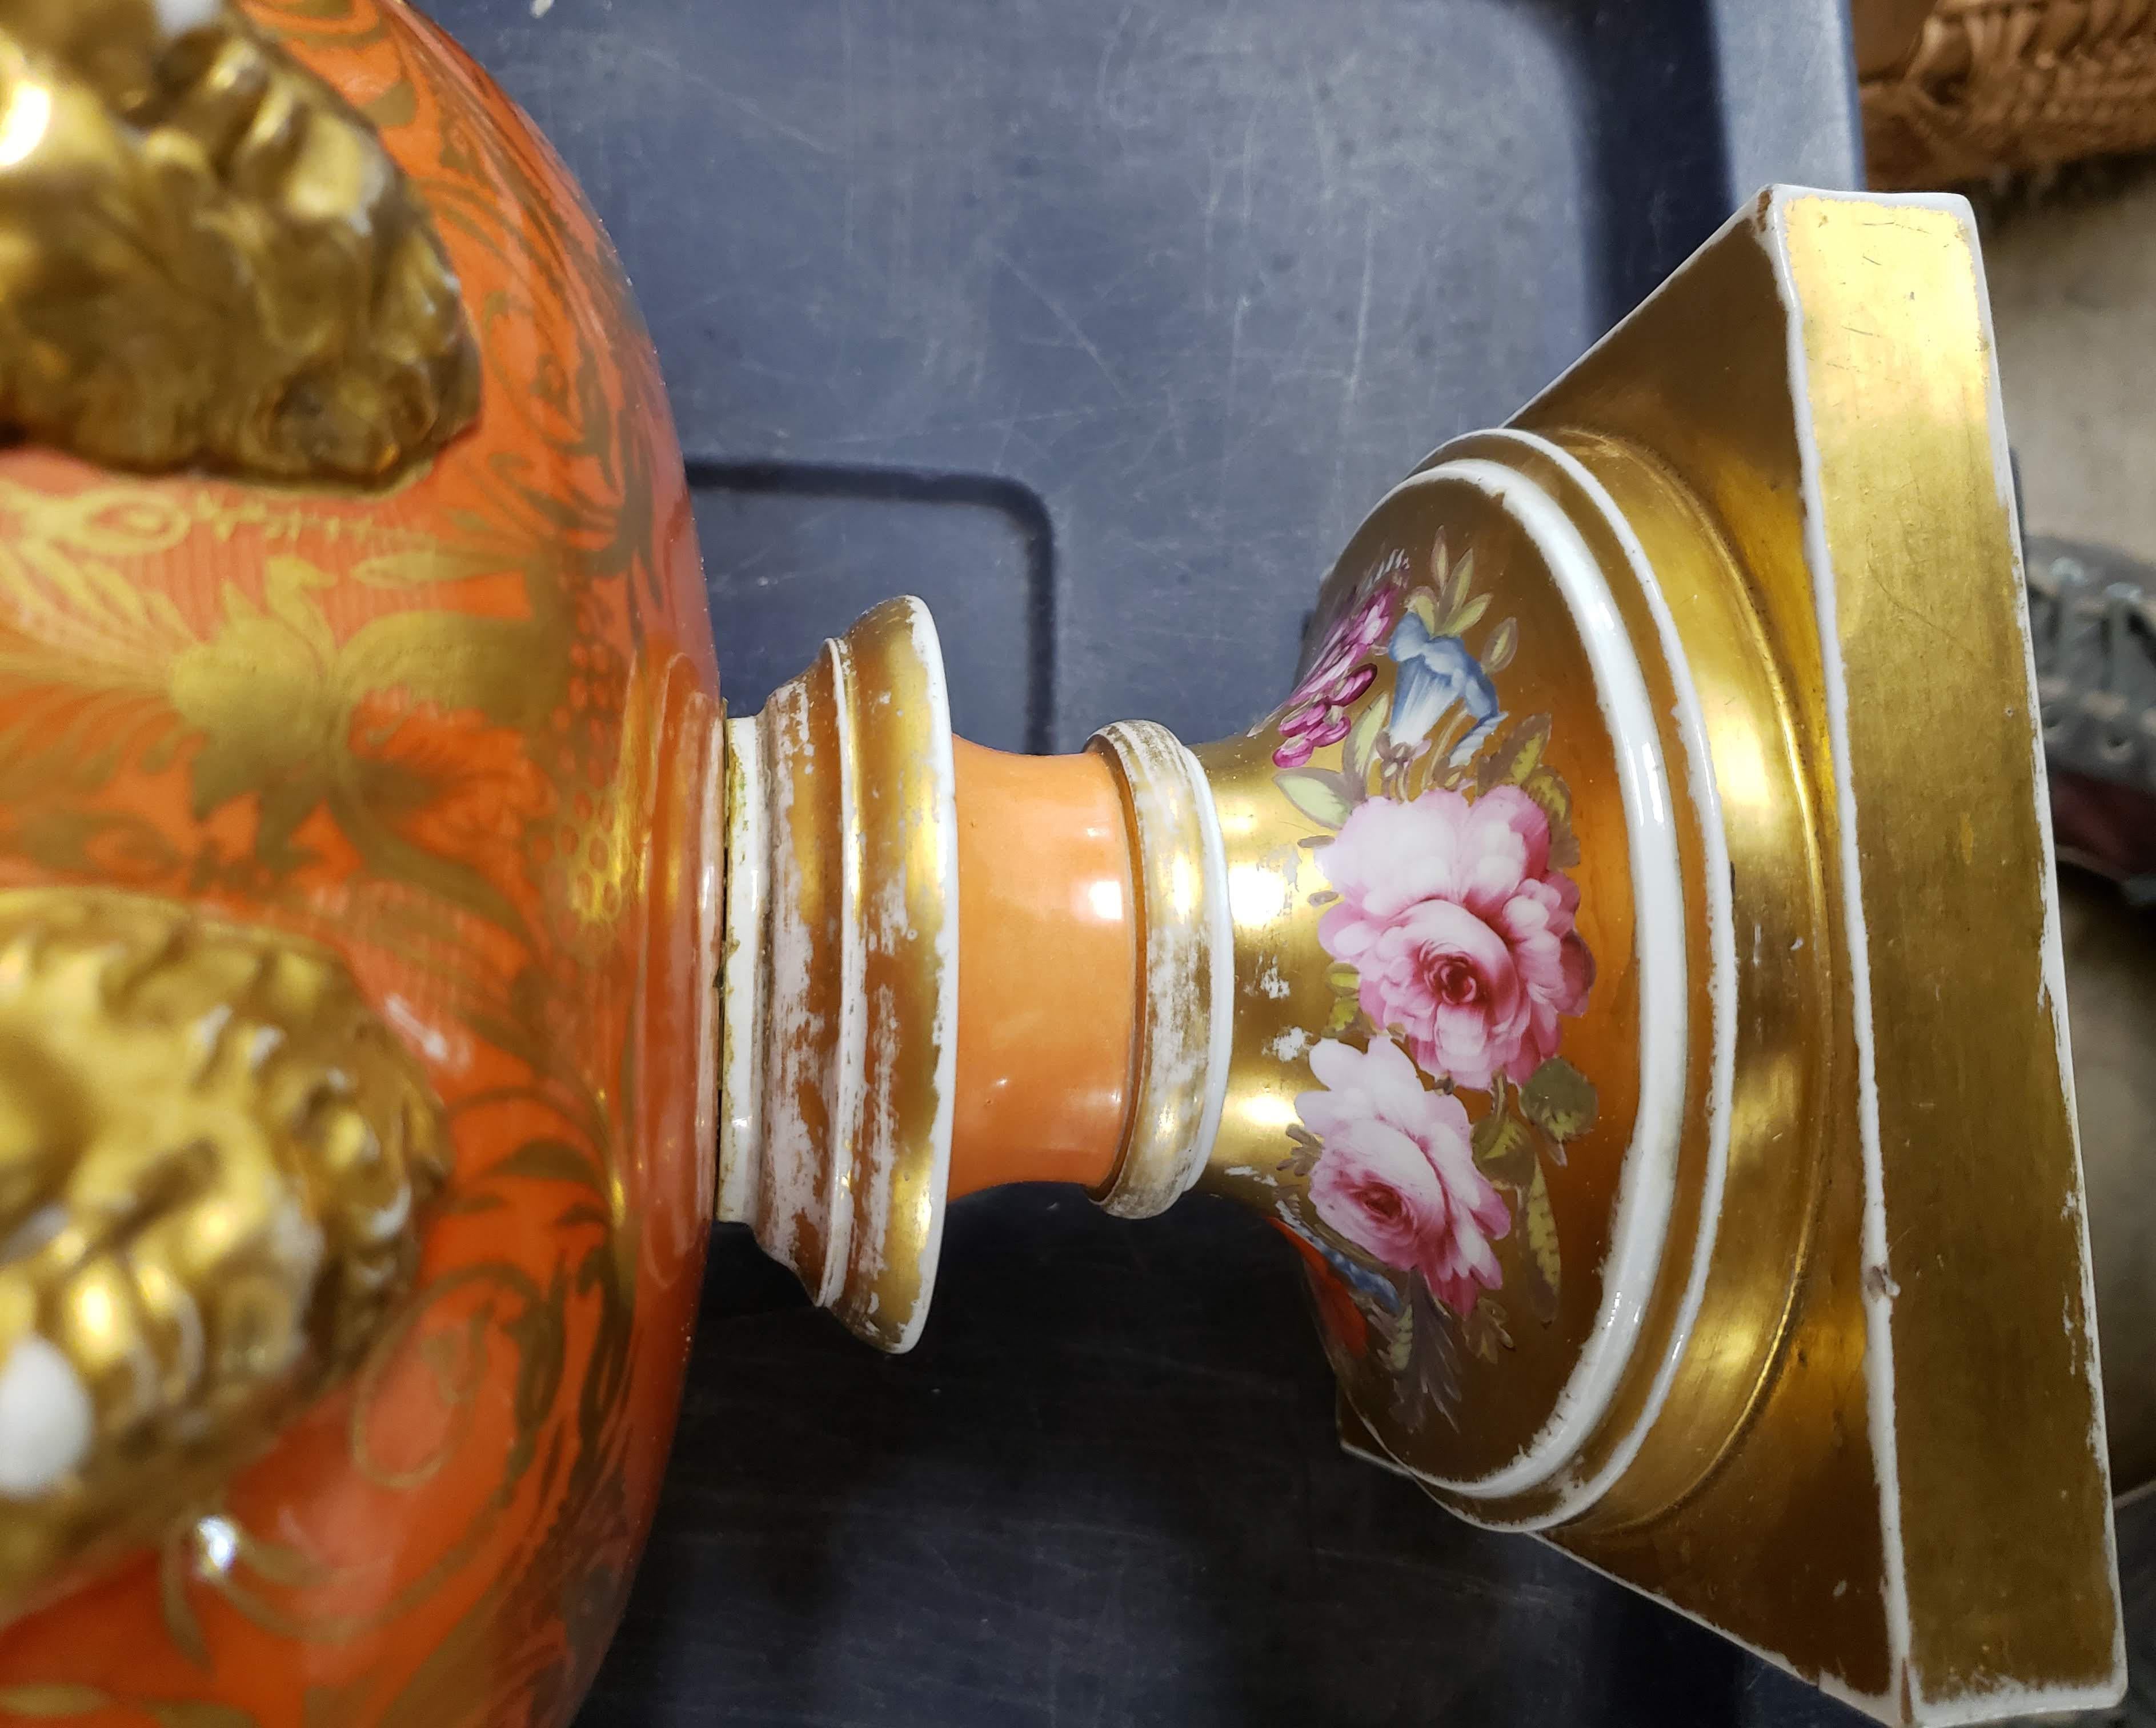 Chamberlain Worcester Porcelain Orange-Ground Botanical Campana-Form Vase In Good Condition For Sale In Downingtown, PA